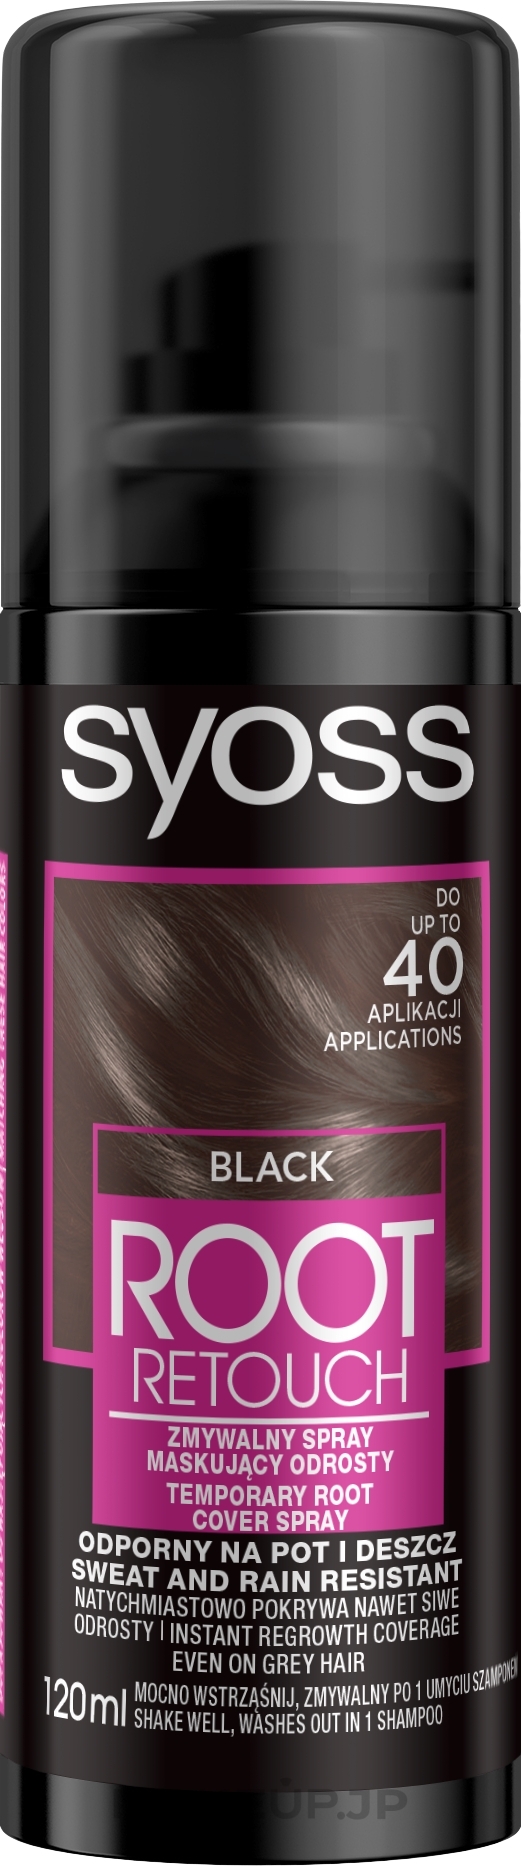 Root Touch Up Spray - Syoss Root Retoucher Spray — photo Black